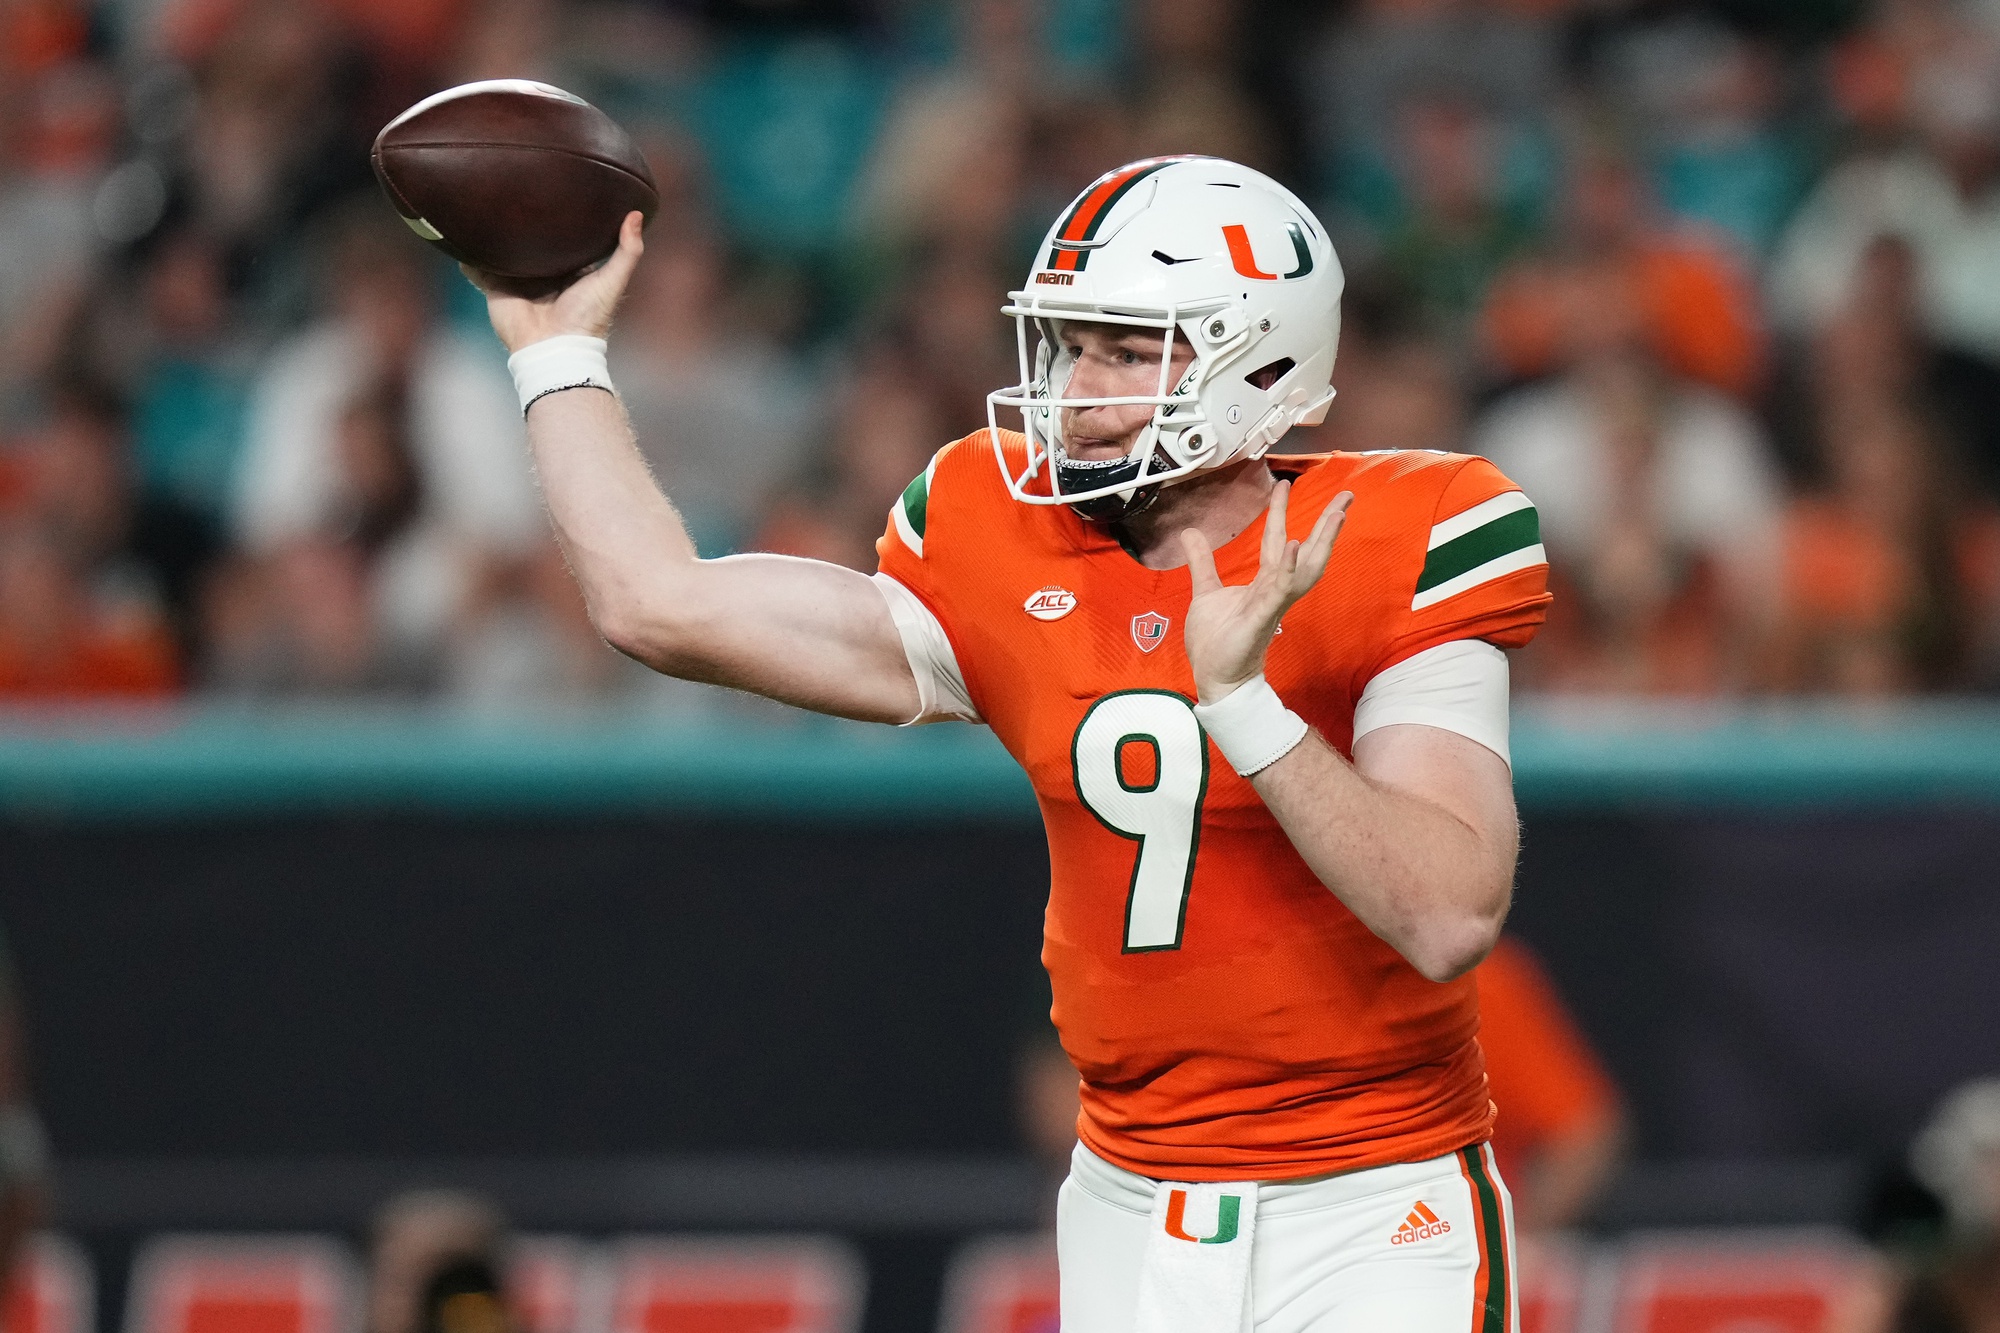 Miami Hurricanes football: depth chart, roster notes, player projections -  The Athletic